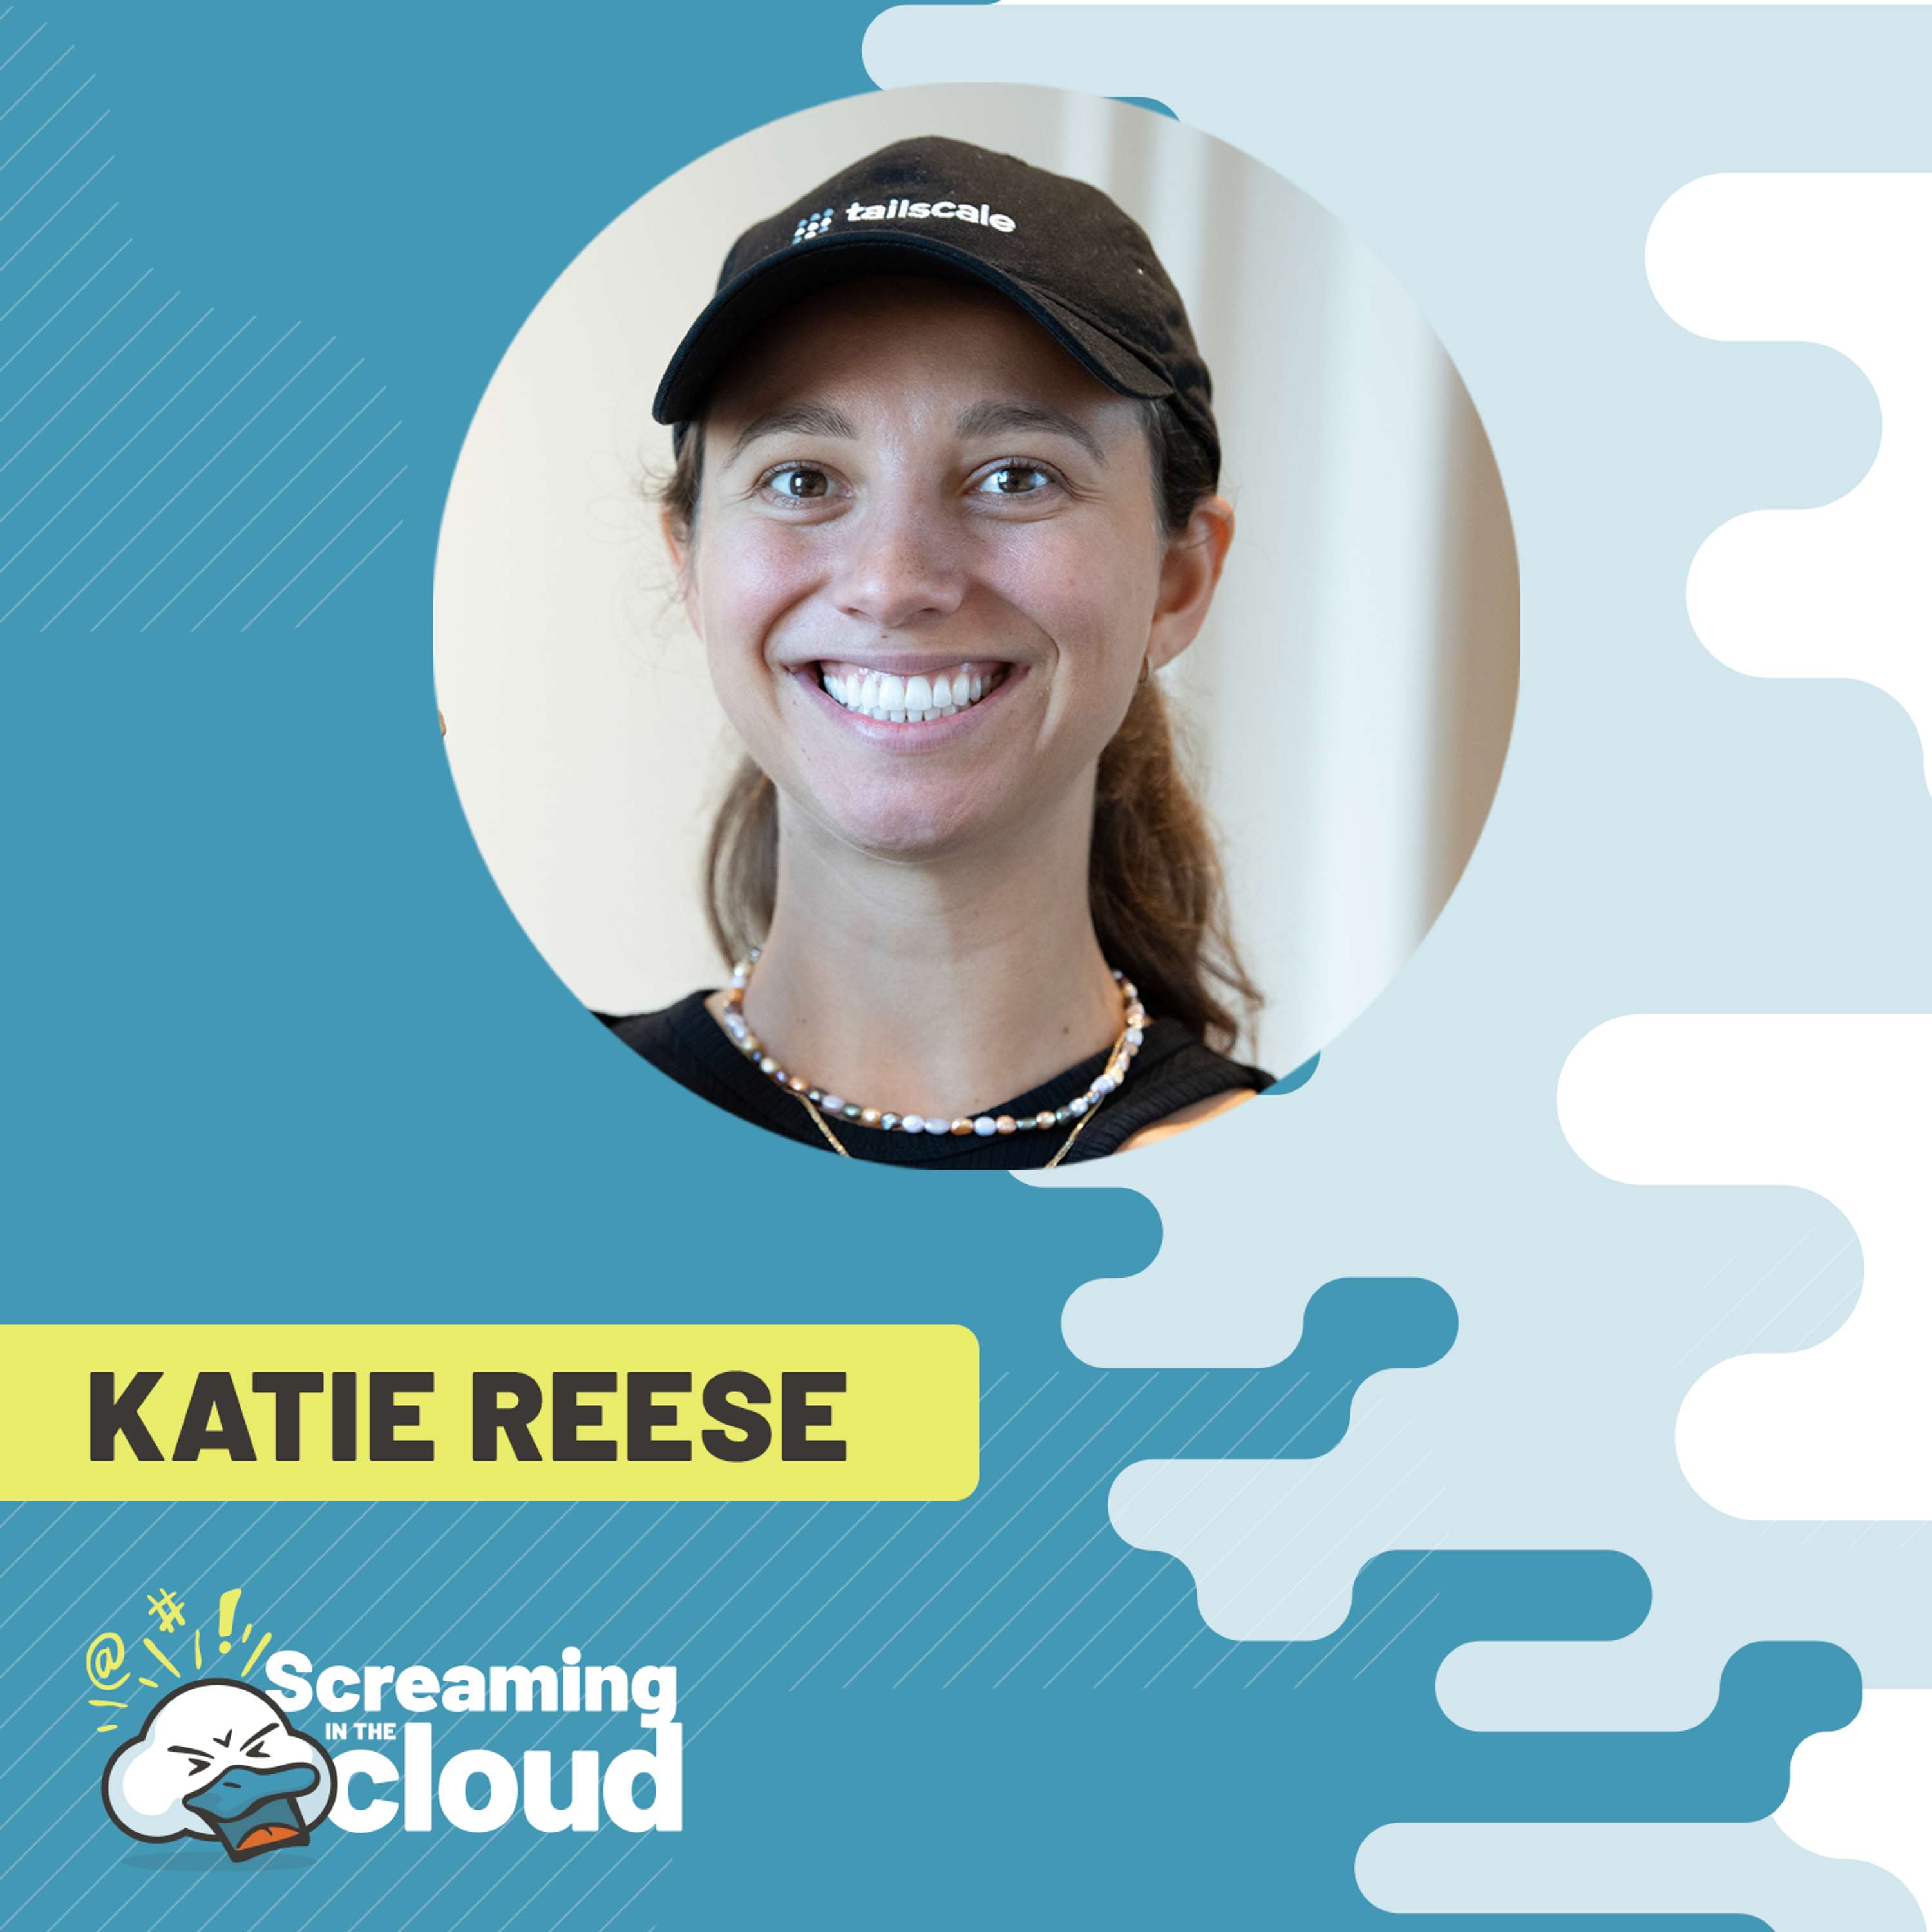 Behind The Tech Event Marketing Scene With Katie Reese